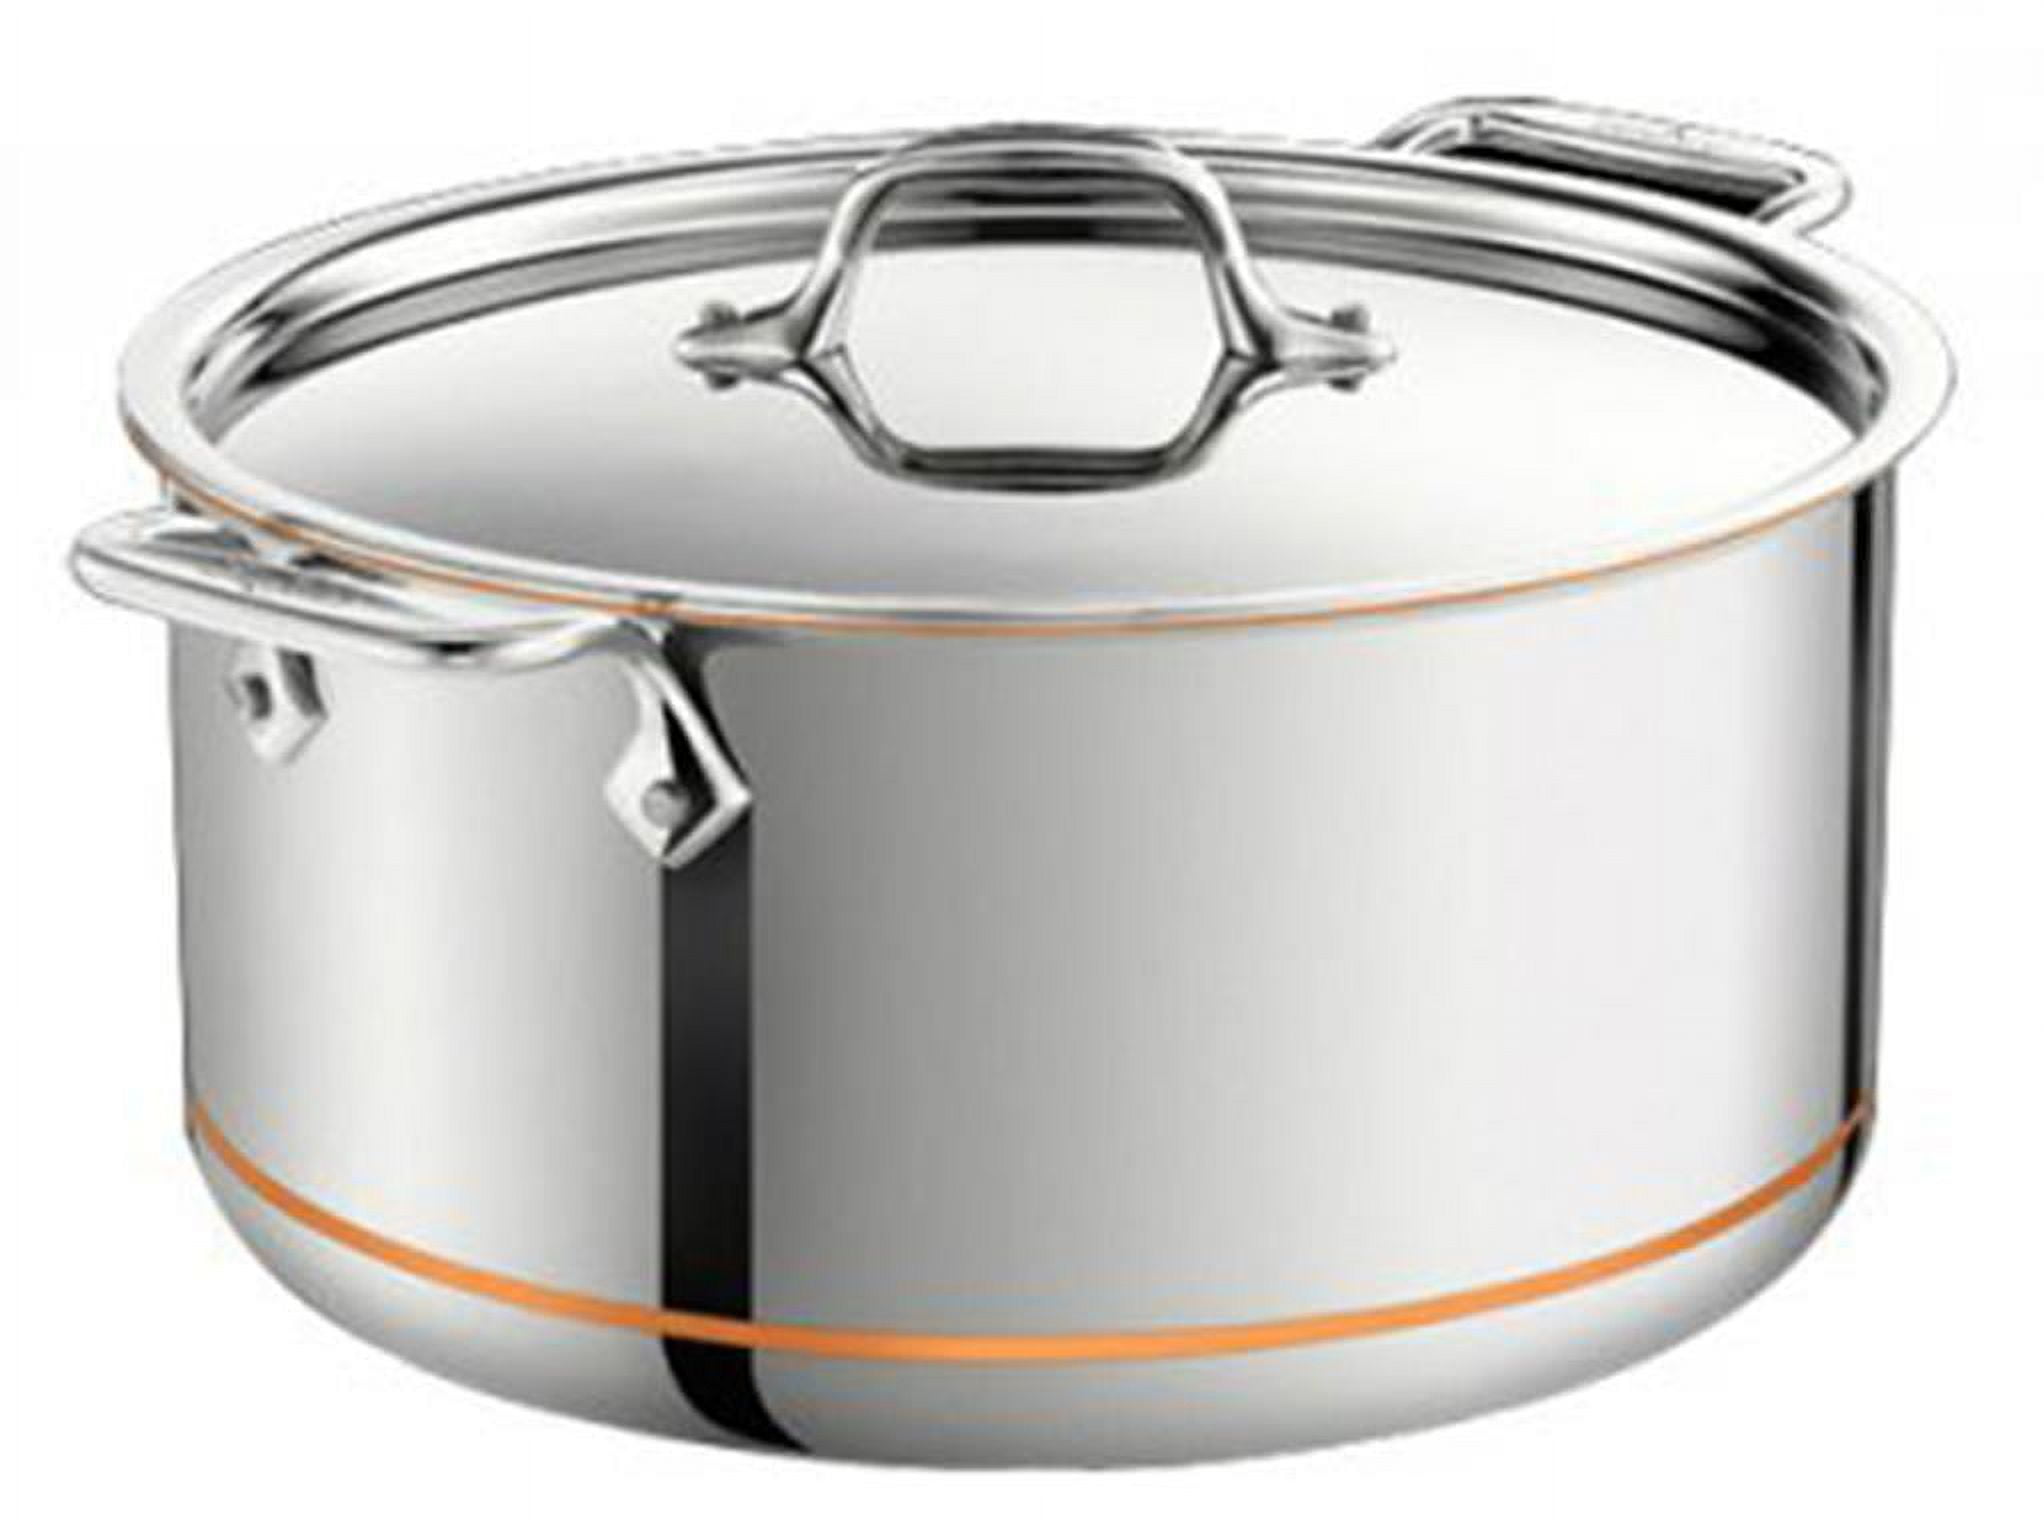 Copper Core 5-ply Bonded Cookware, Stockpot with lid, 8 quart